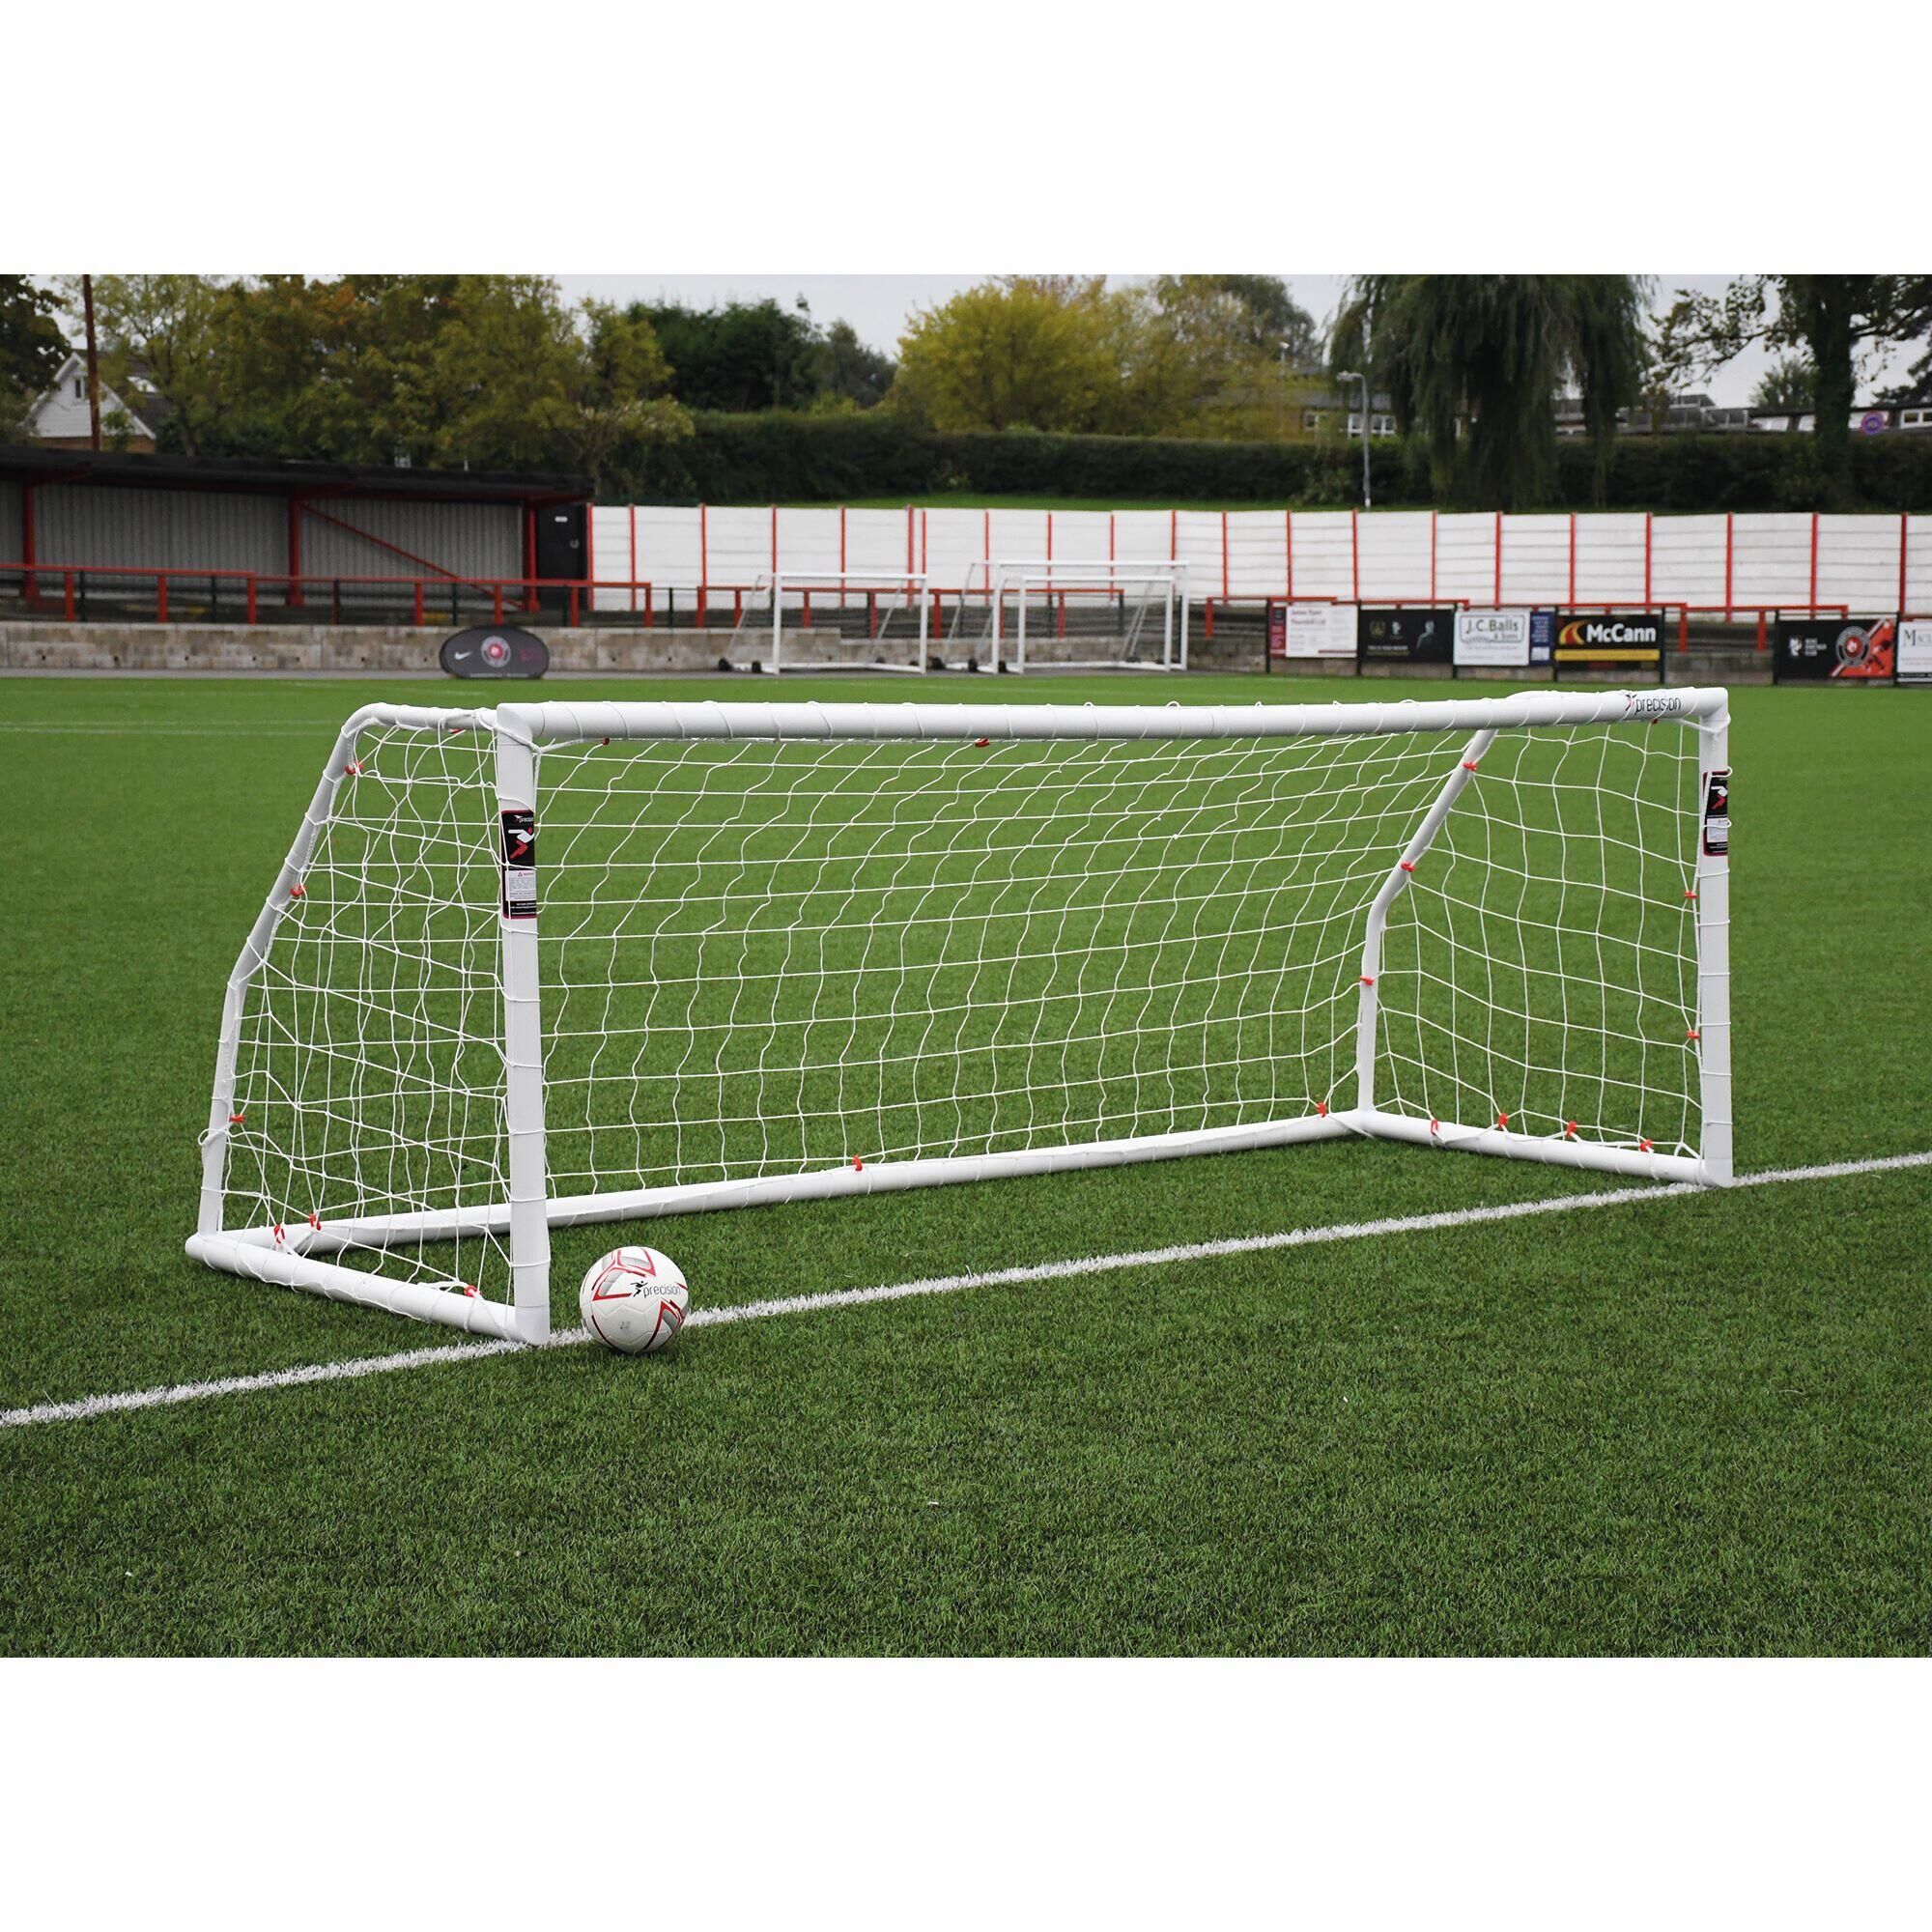 PRECISION TRAINING Precision Match Goal Posts 12' x 4' (BS 8462 approved) - White Colour